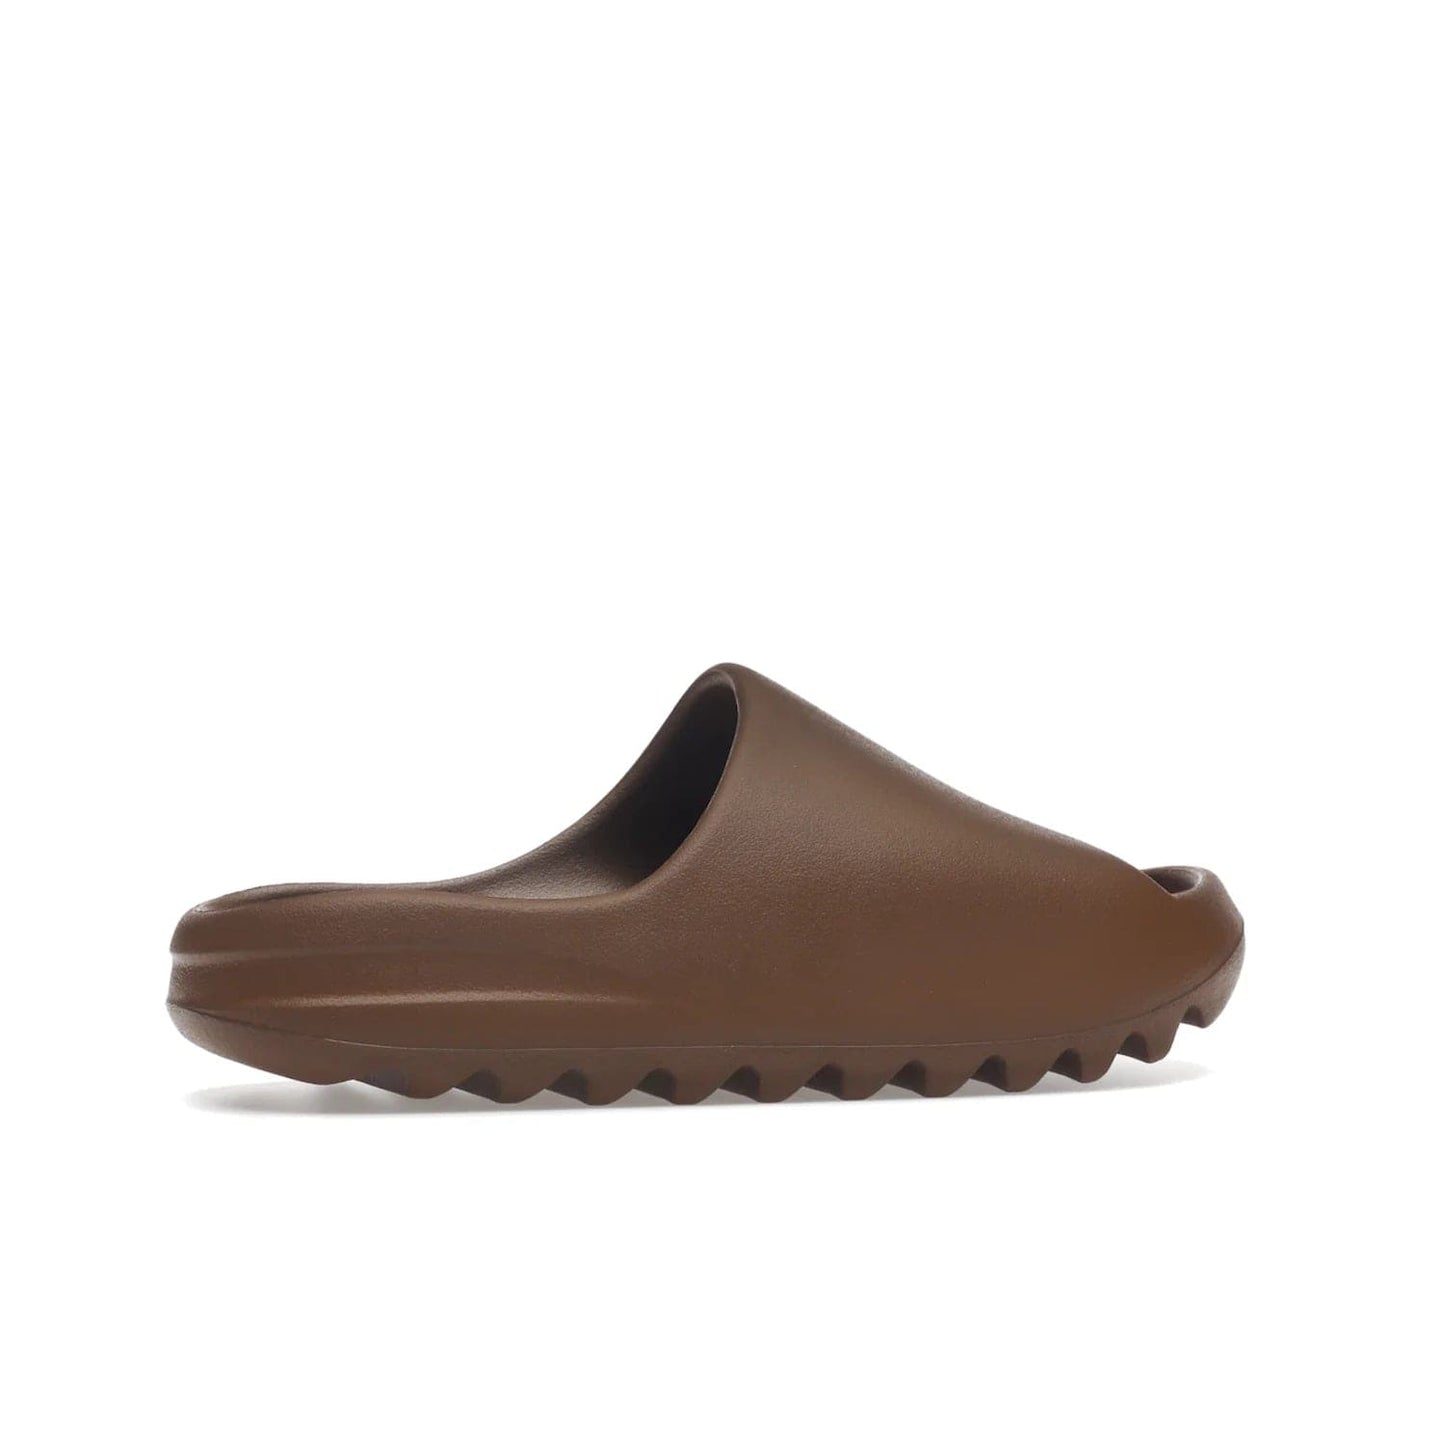 adidas Yeezy Slide Flax - Image 35 - Only at www.BallersClubKickz.com - Score the perfect casual look with the adidas Yeezy Slide Flax. Made with lightweight injected EVA plus horizontal grooves underfoot for traction. Release on August 22, 2022. $70.